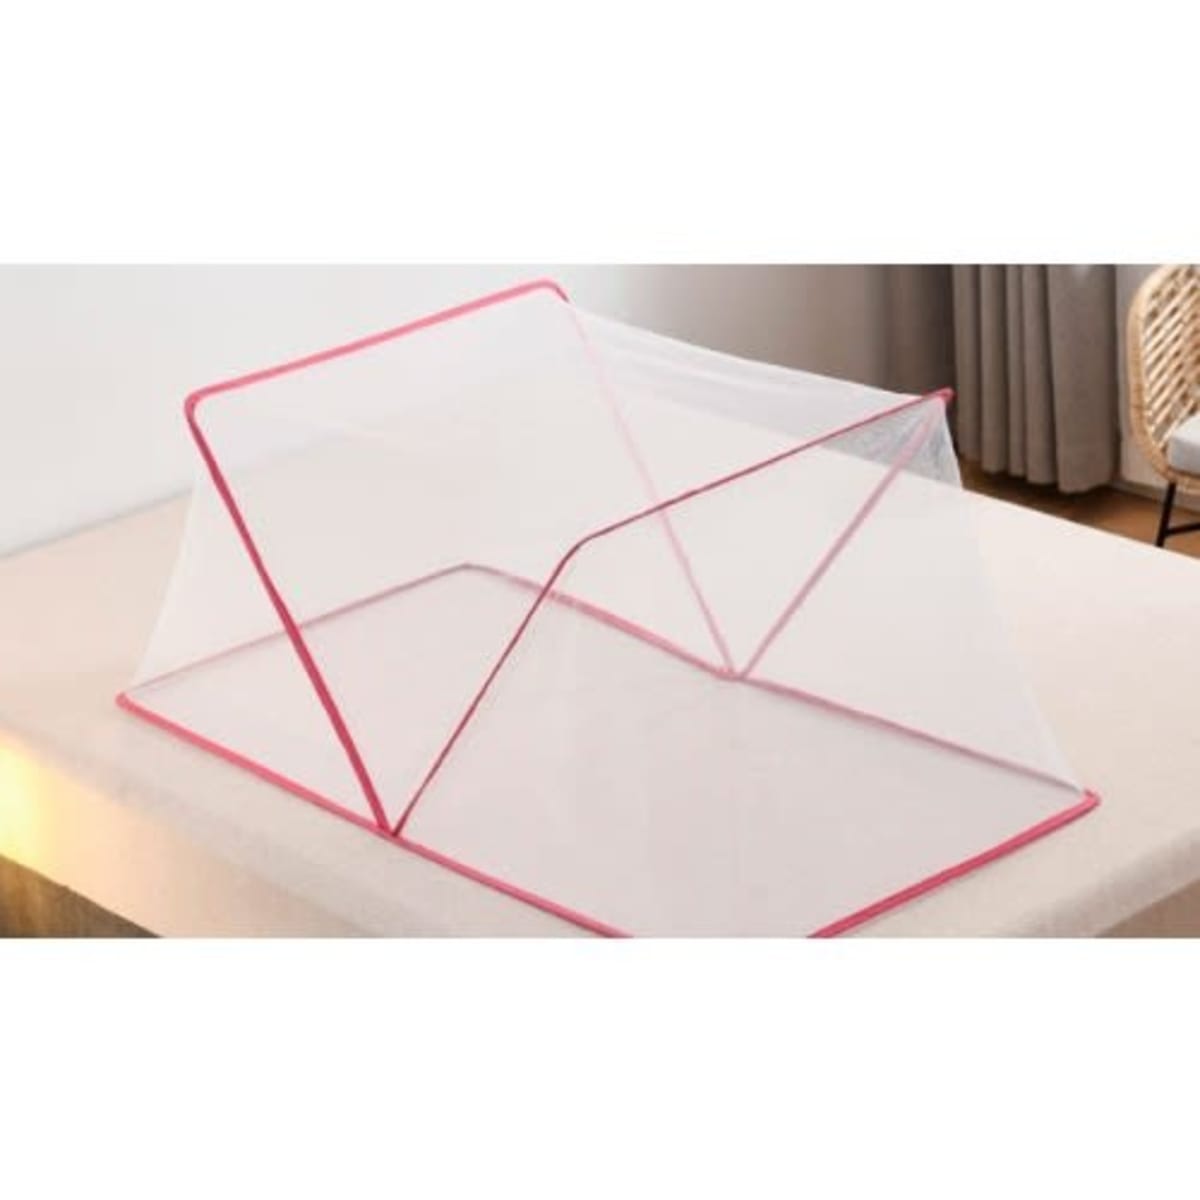 Collapsible Mosquito Net -4ft X 6ft - Pink